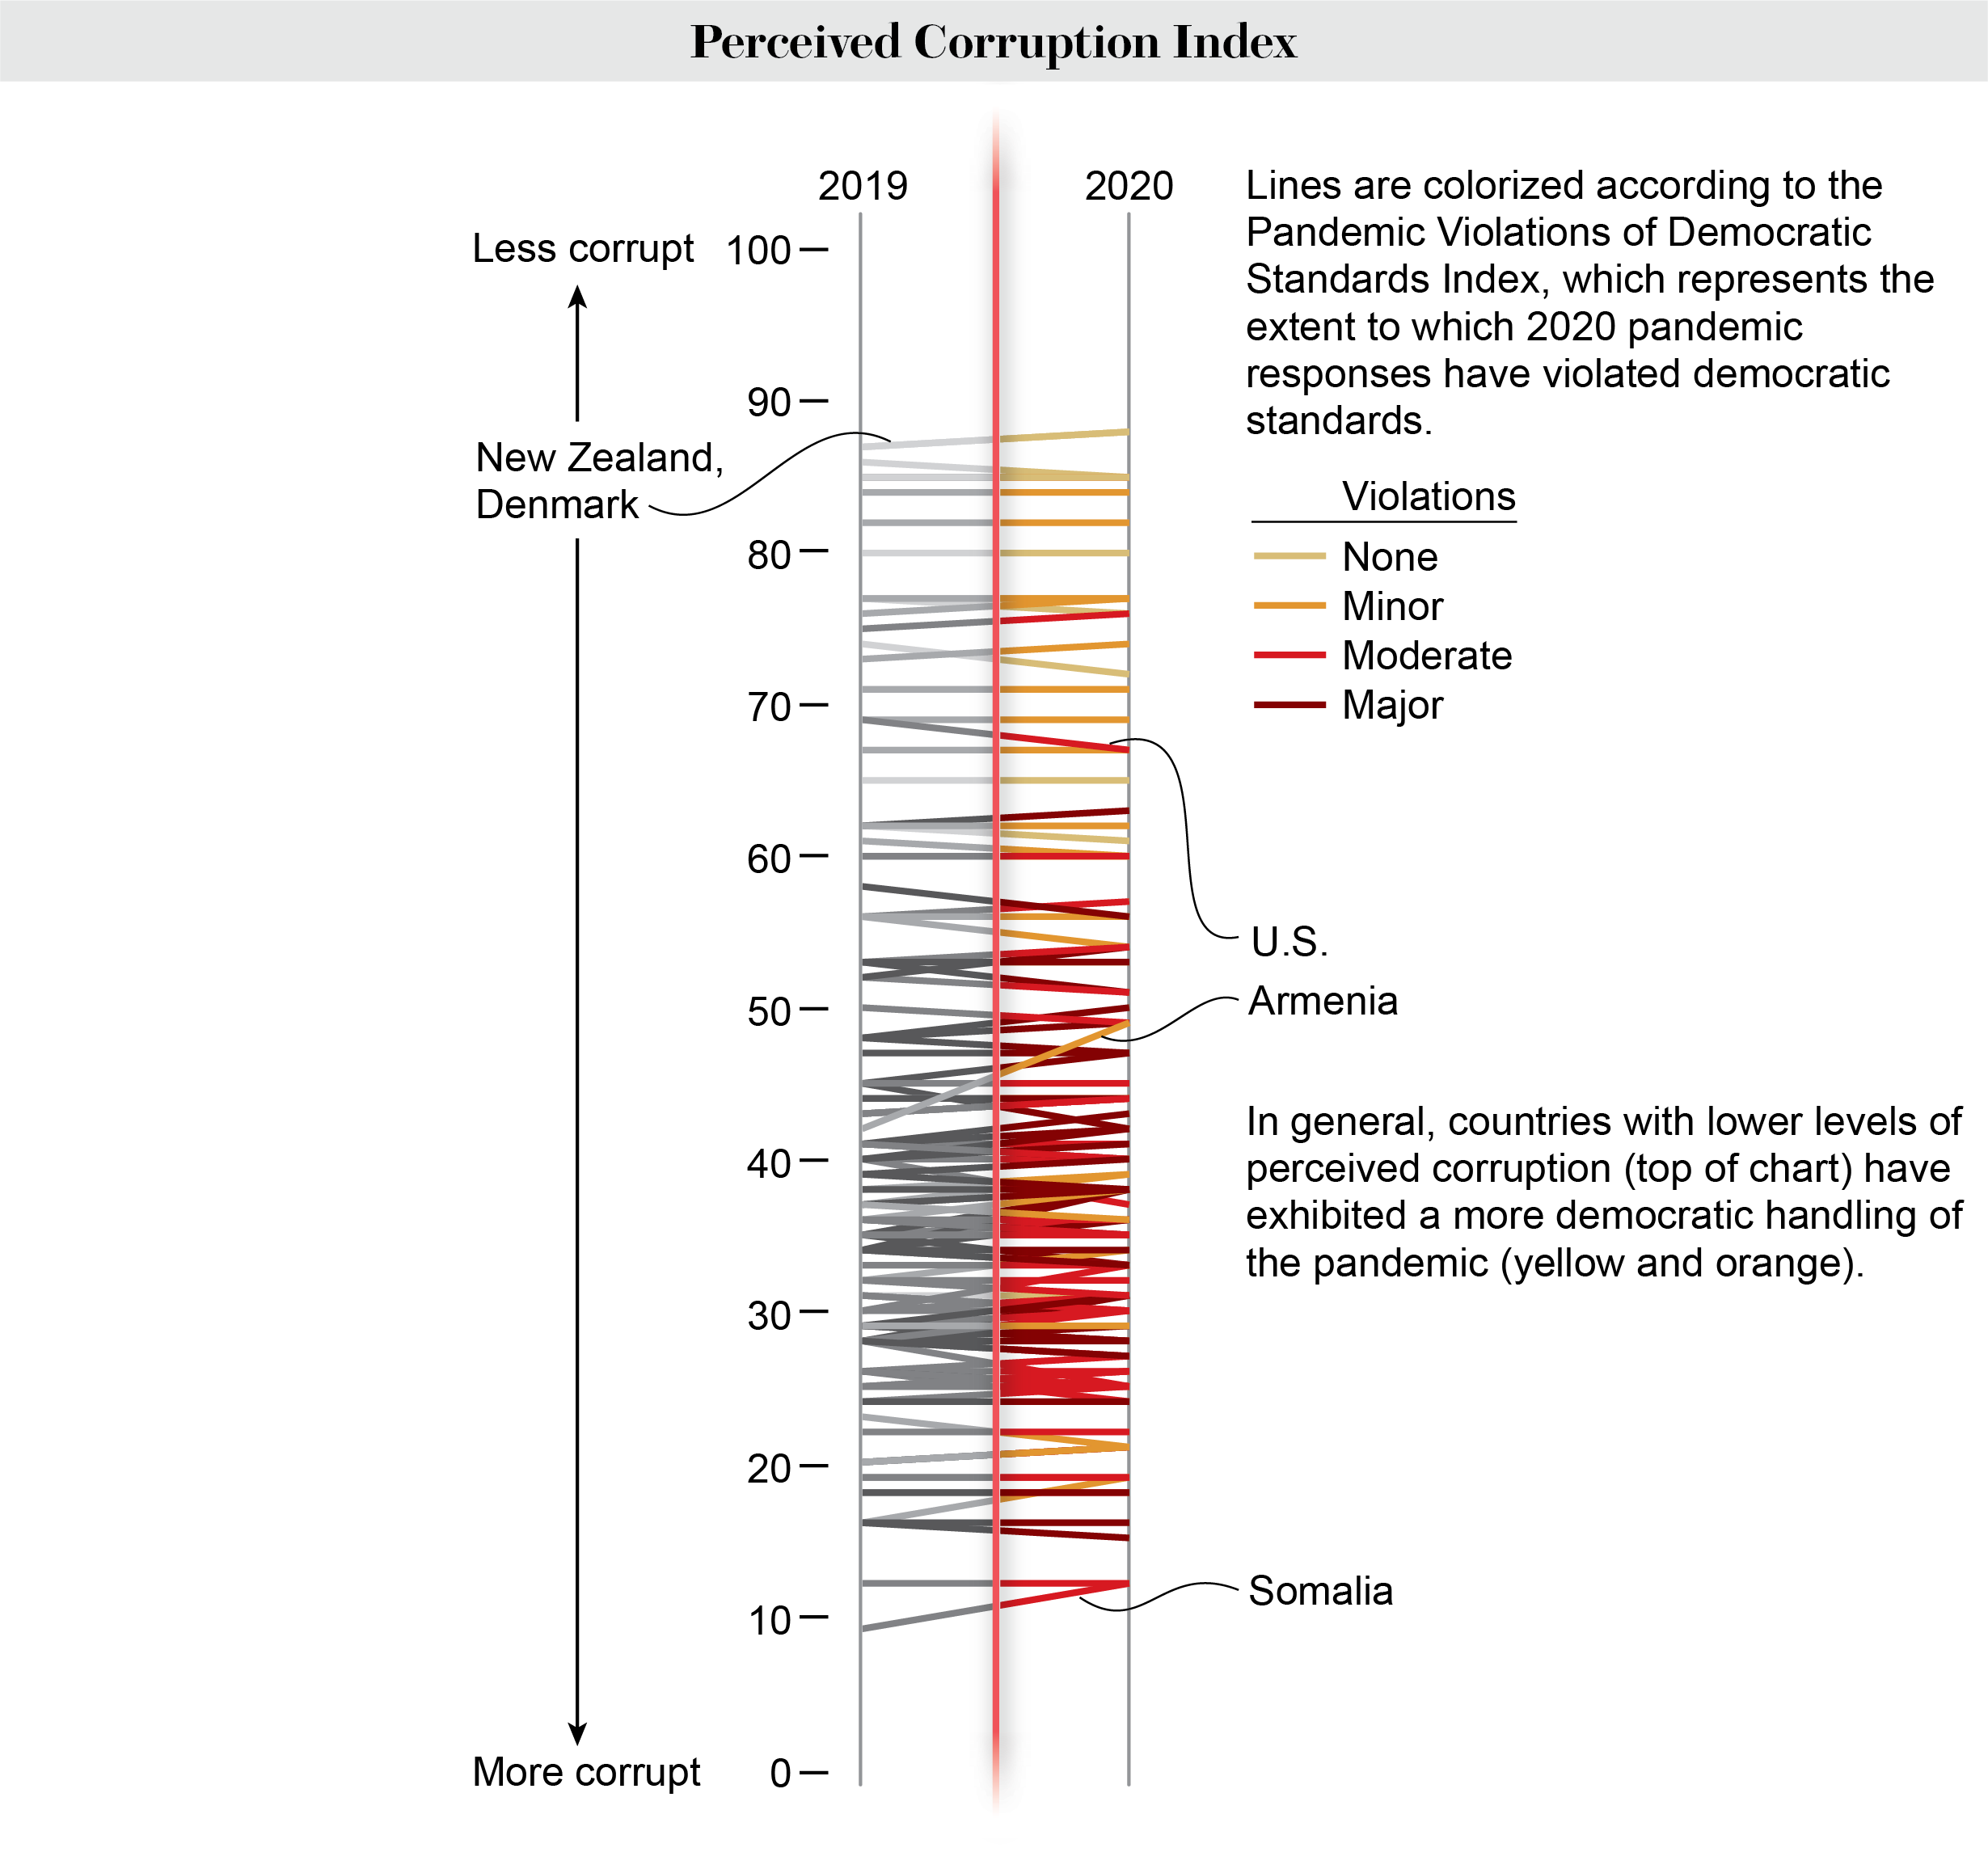 Corruption Perception Index and Pandemic Violation of Democratic Standards Index values for 139 countries.